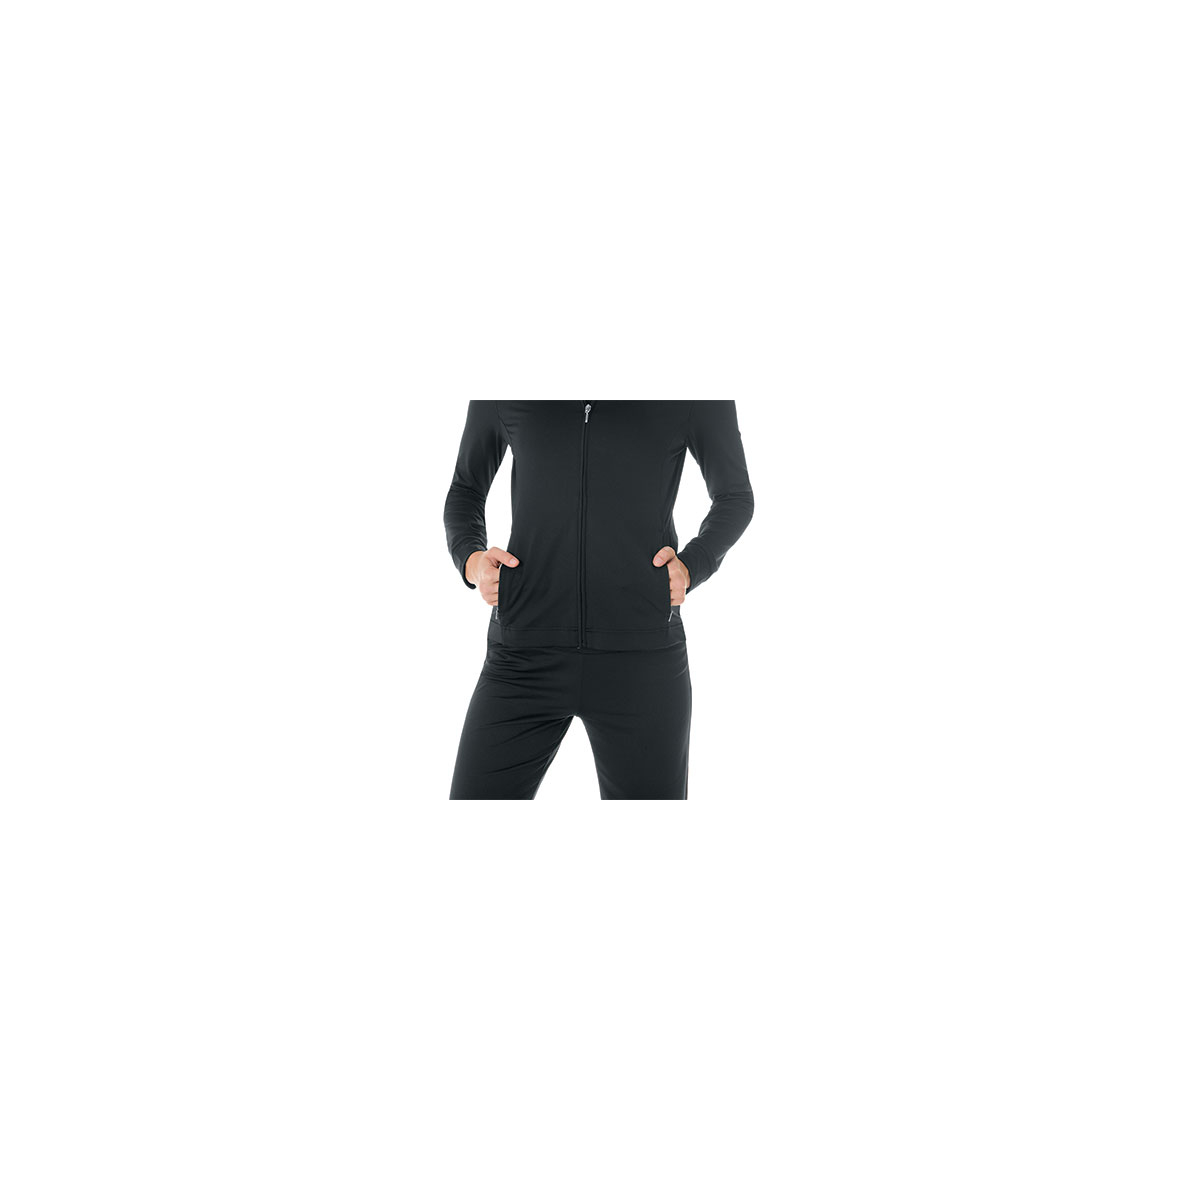 Women's Fitness Pant by Charles River Apparel